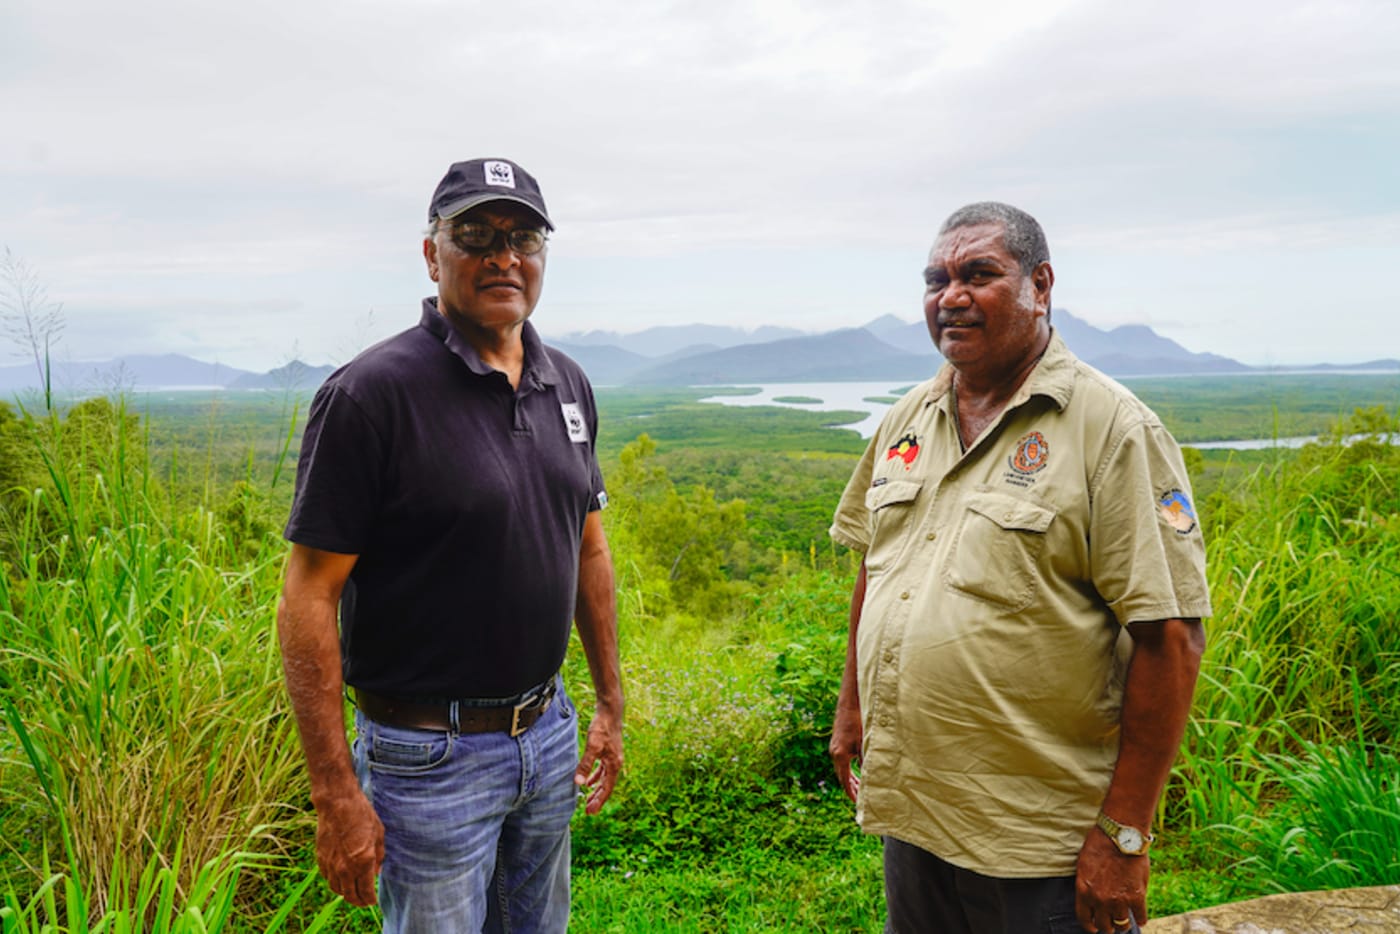 (Pictured L-R) WWF-Australia’s Cliff Cobbo and Uncle Eddie Smallwood ( Gudjuda Reference Group Aboriginal Corporation) overlooking Hinchinbrook Island National Park= part of the Great Barrier Reef World Heritage Area